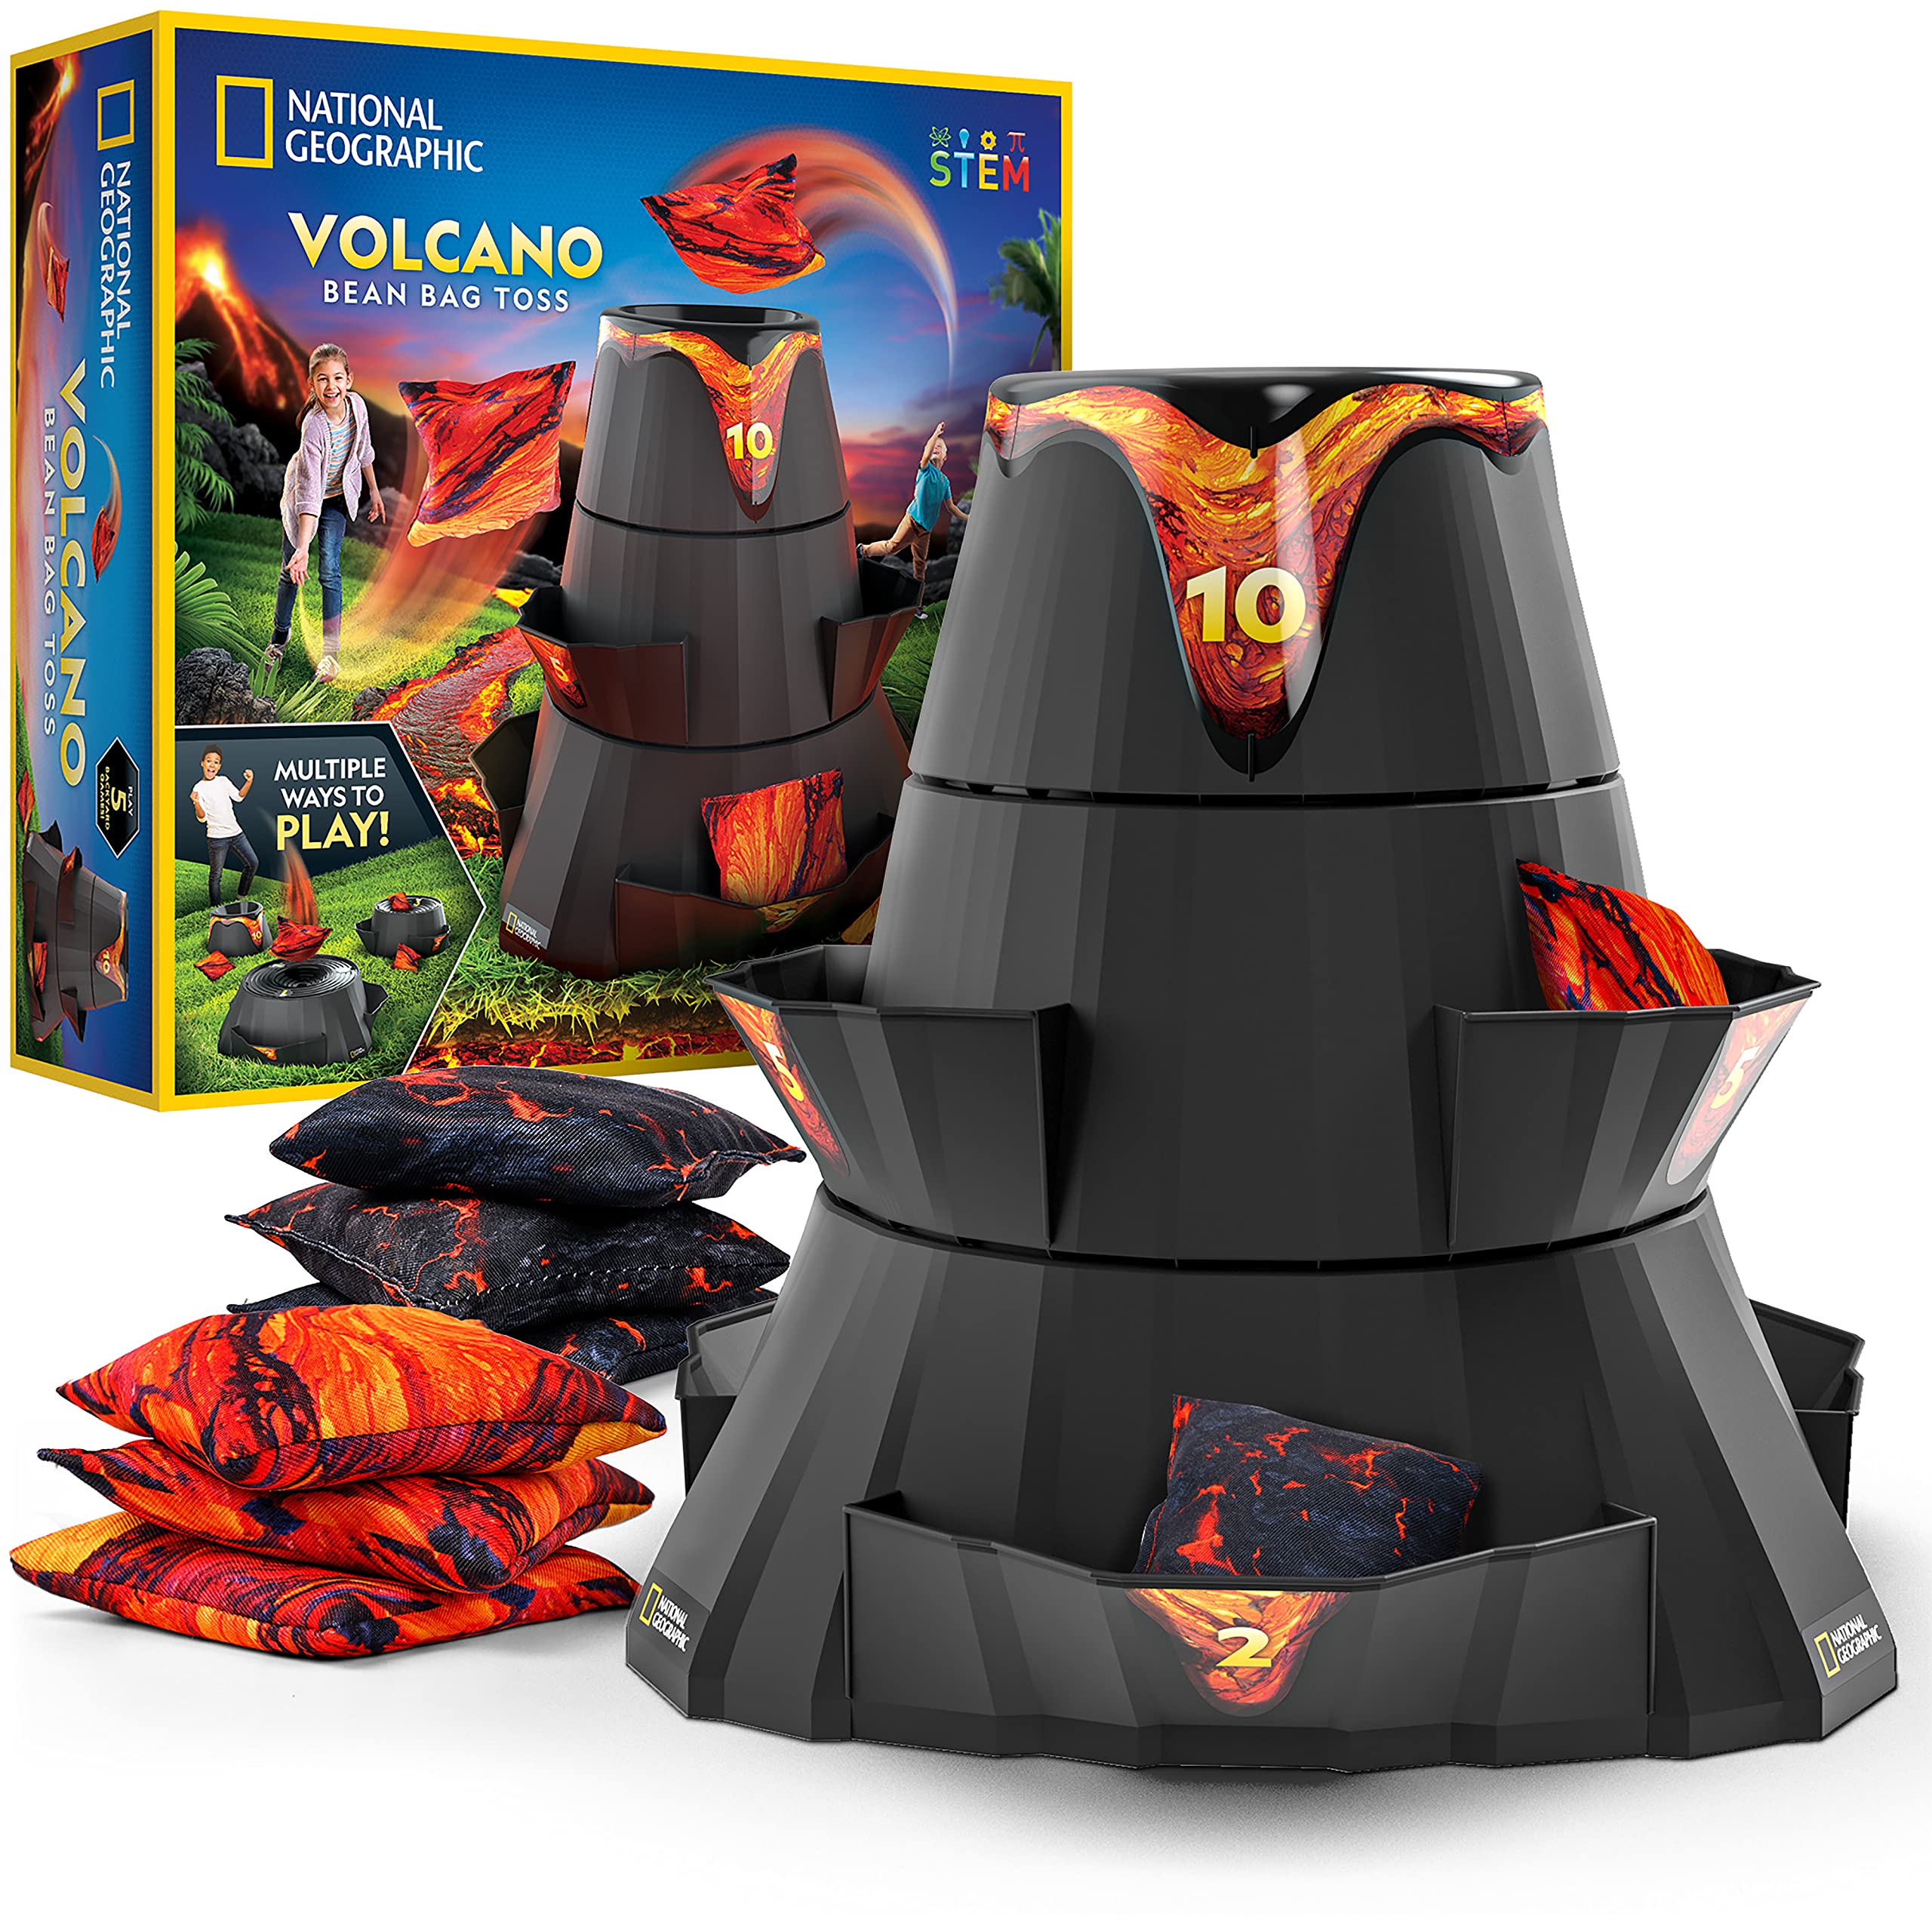 NATIONAL GEOGRAPHIC Volcano Bean Bag Toss Game for Kids - Kids Cornhole Game Set with 5 Backyard Games, Bean Bags for Tossing, Yard Games for Kids, Outdoor Kids Games, Patio Games (Amazon Exclusive)